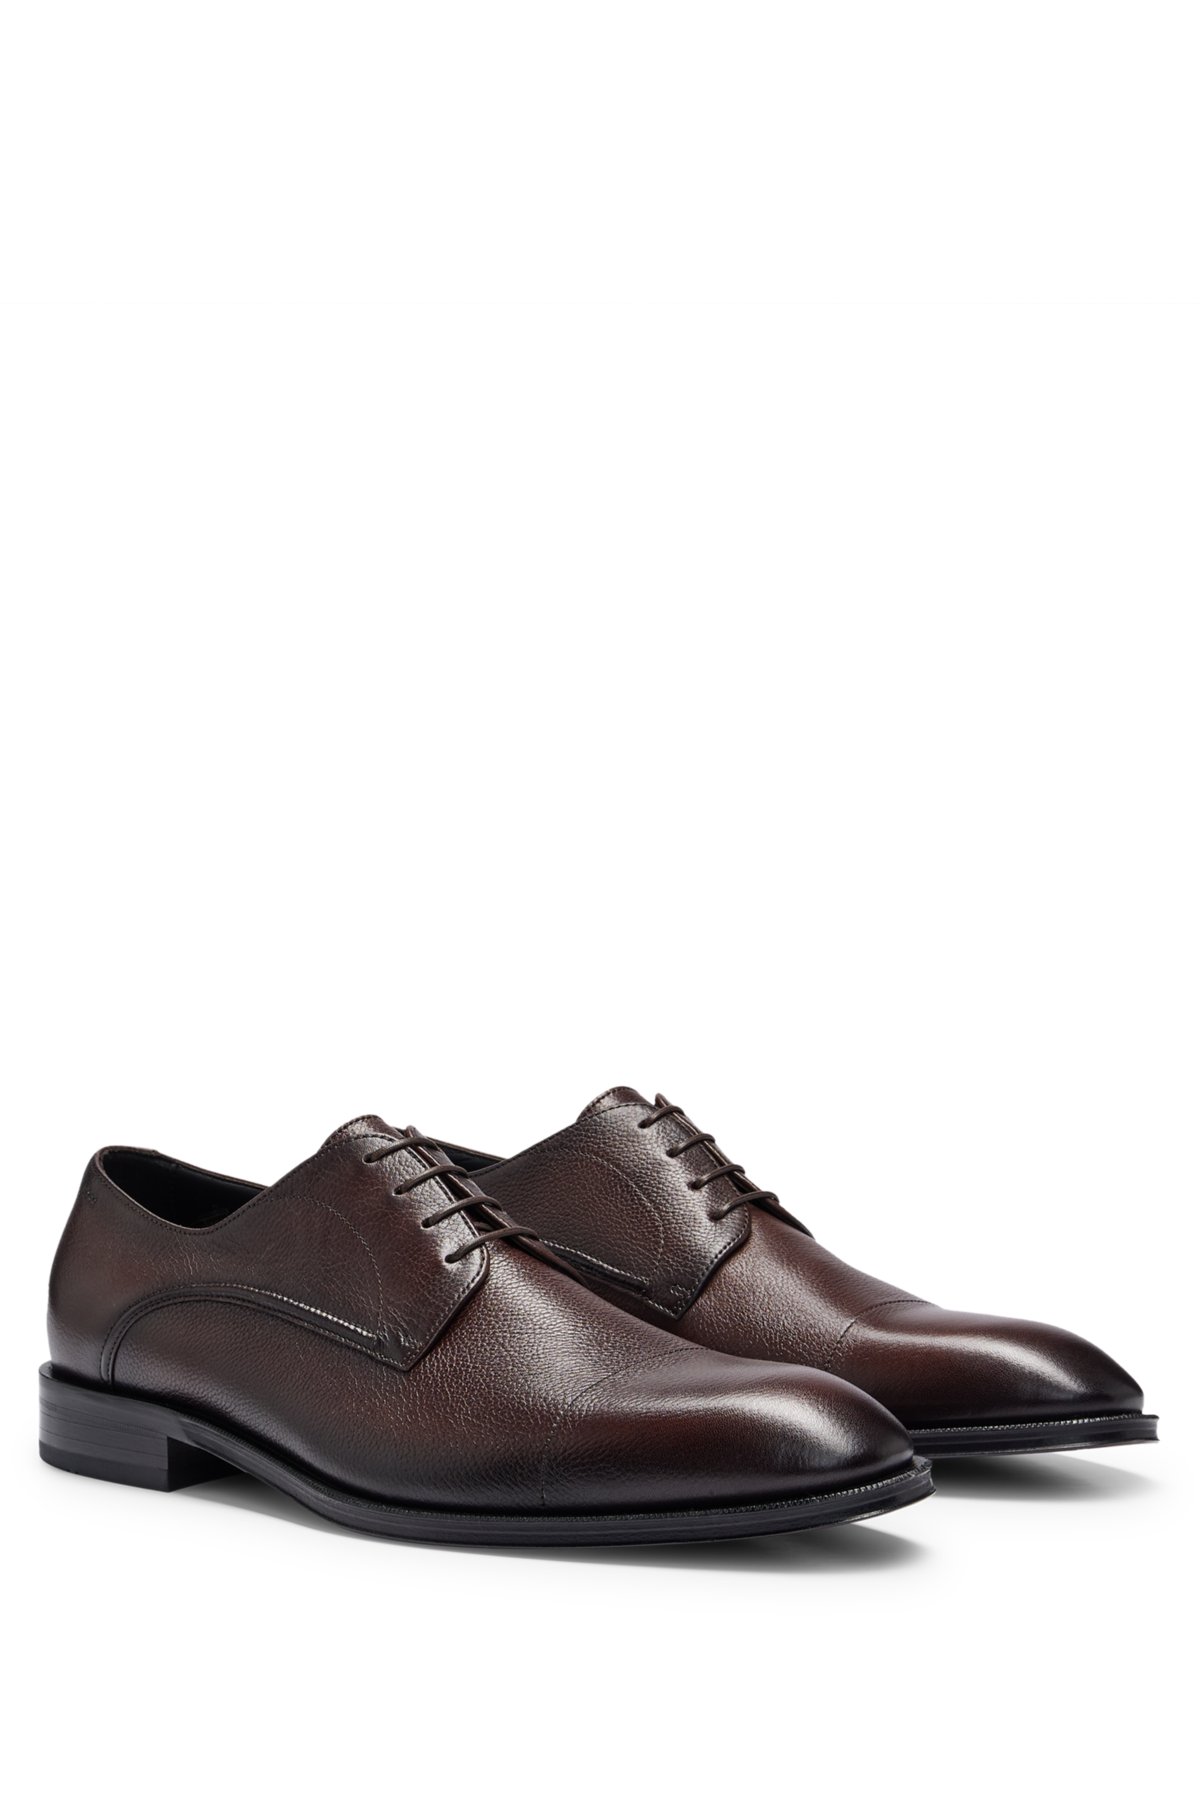 BOSS - Grained-leather Derby shoes with cap toe